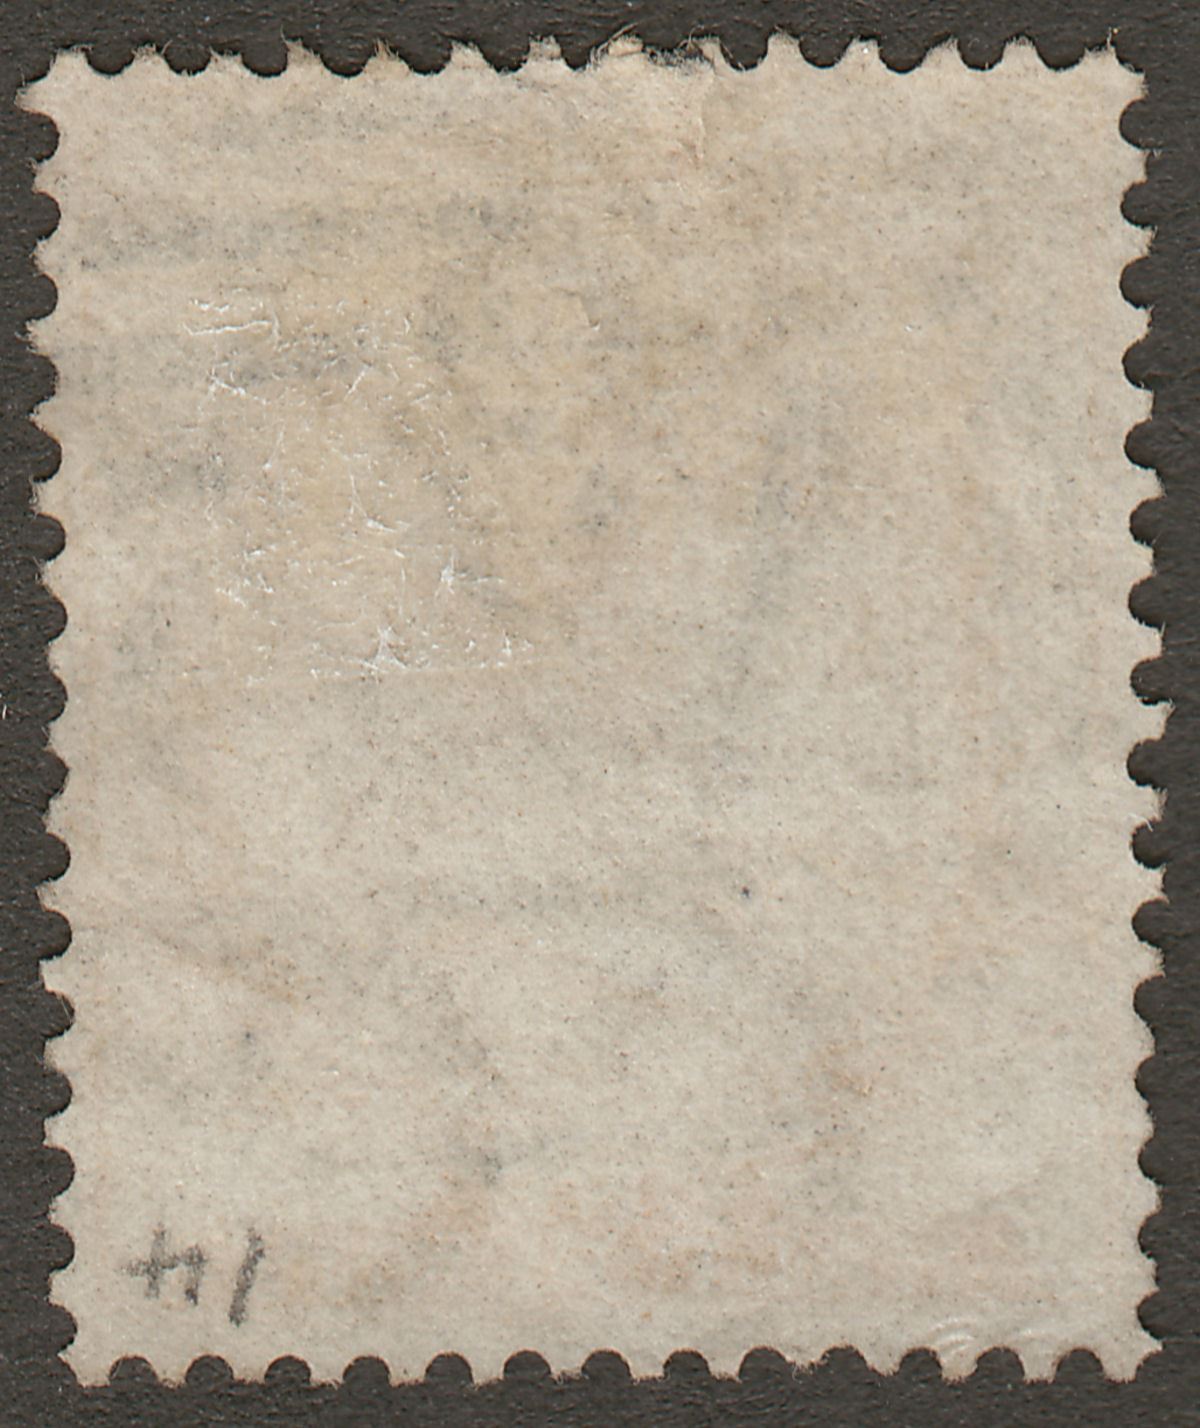 Malta 1863 Queen Victoria ½d Pale Orange? p14 Used with A25 Postmark